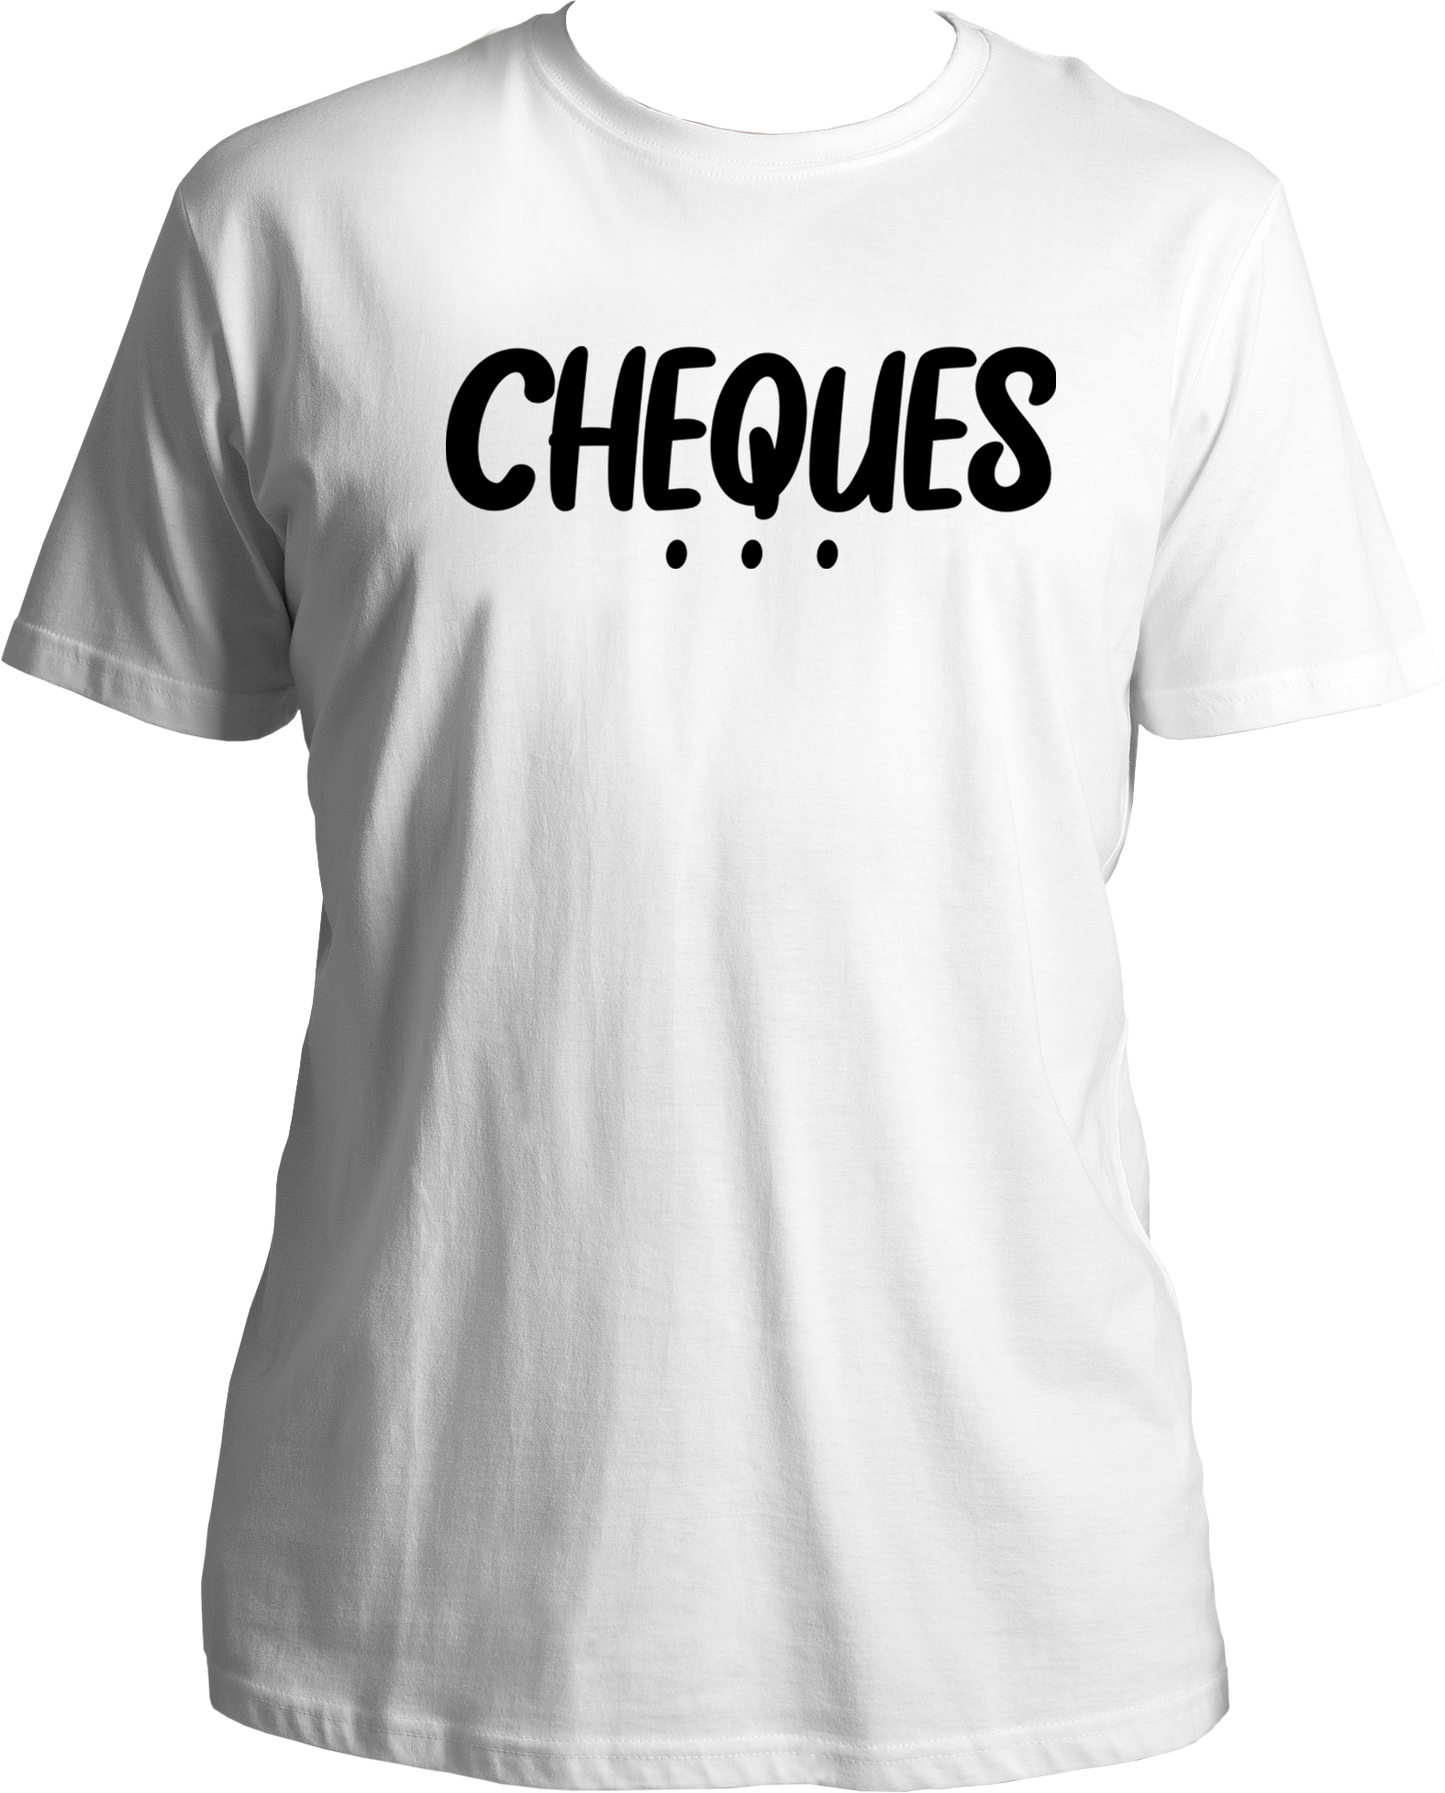 For fans of Punjabi songs and text t-shirts, this is a steal deal you don't want to miss. The "CHEQUES" tee is more than just lyrics on fabric—it's a piece of musical history you can wear.